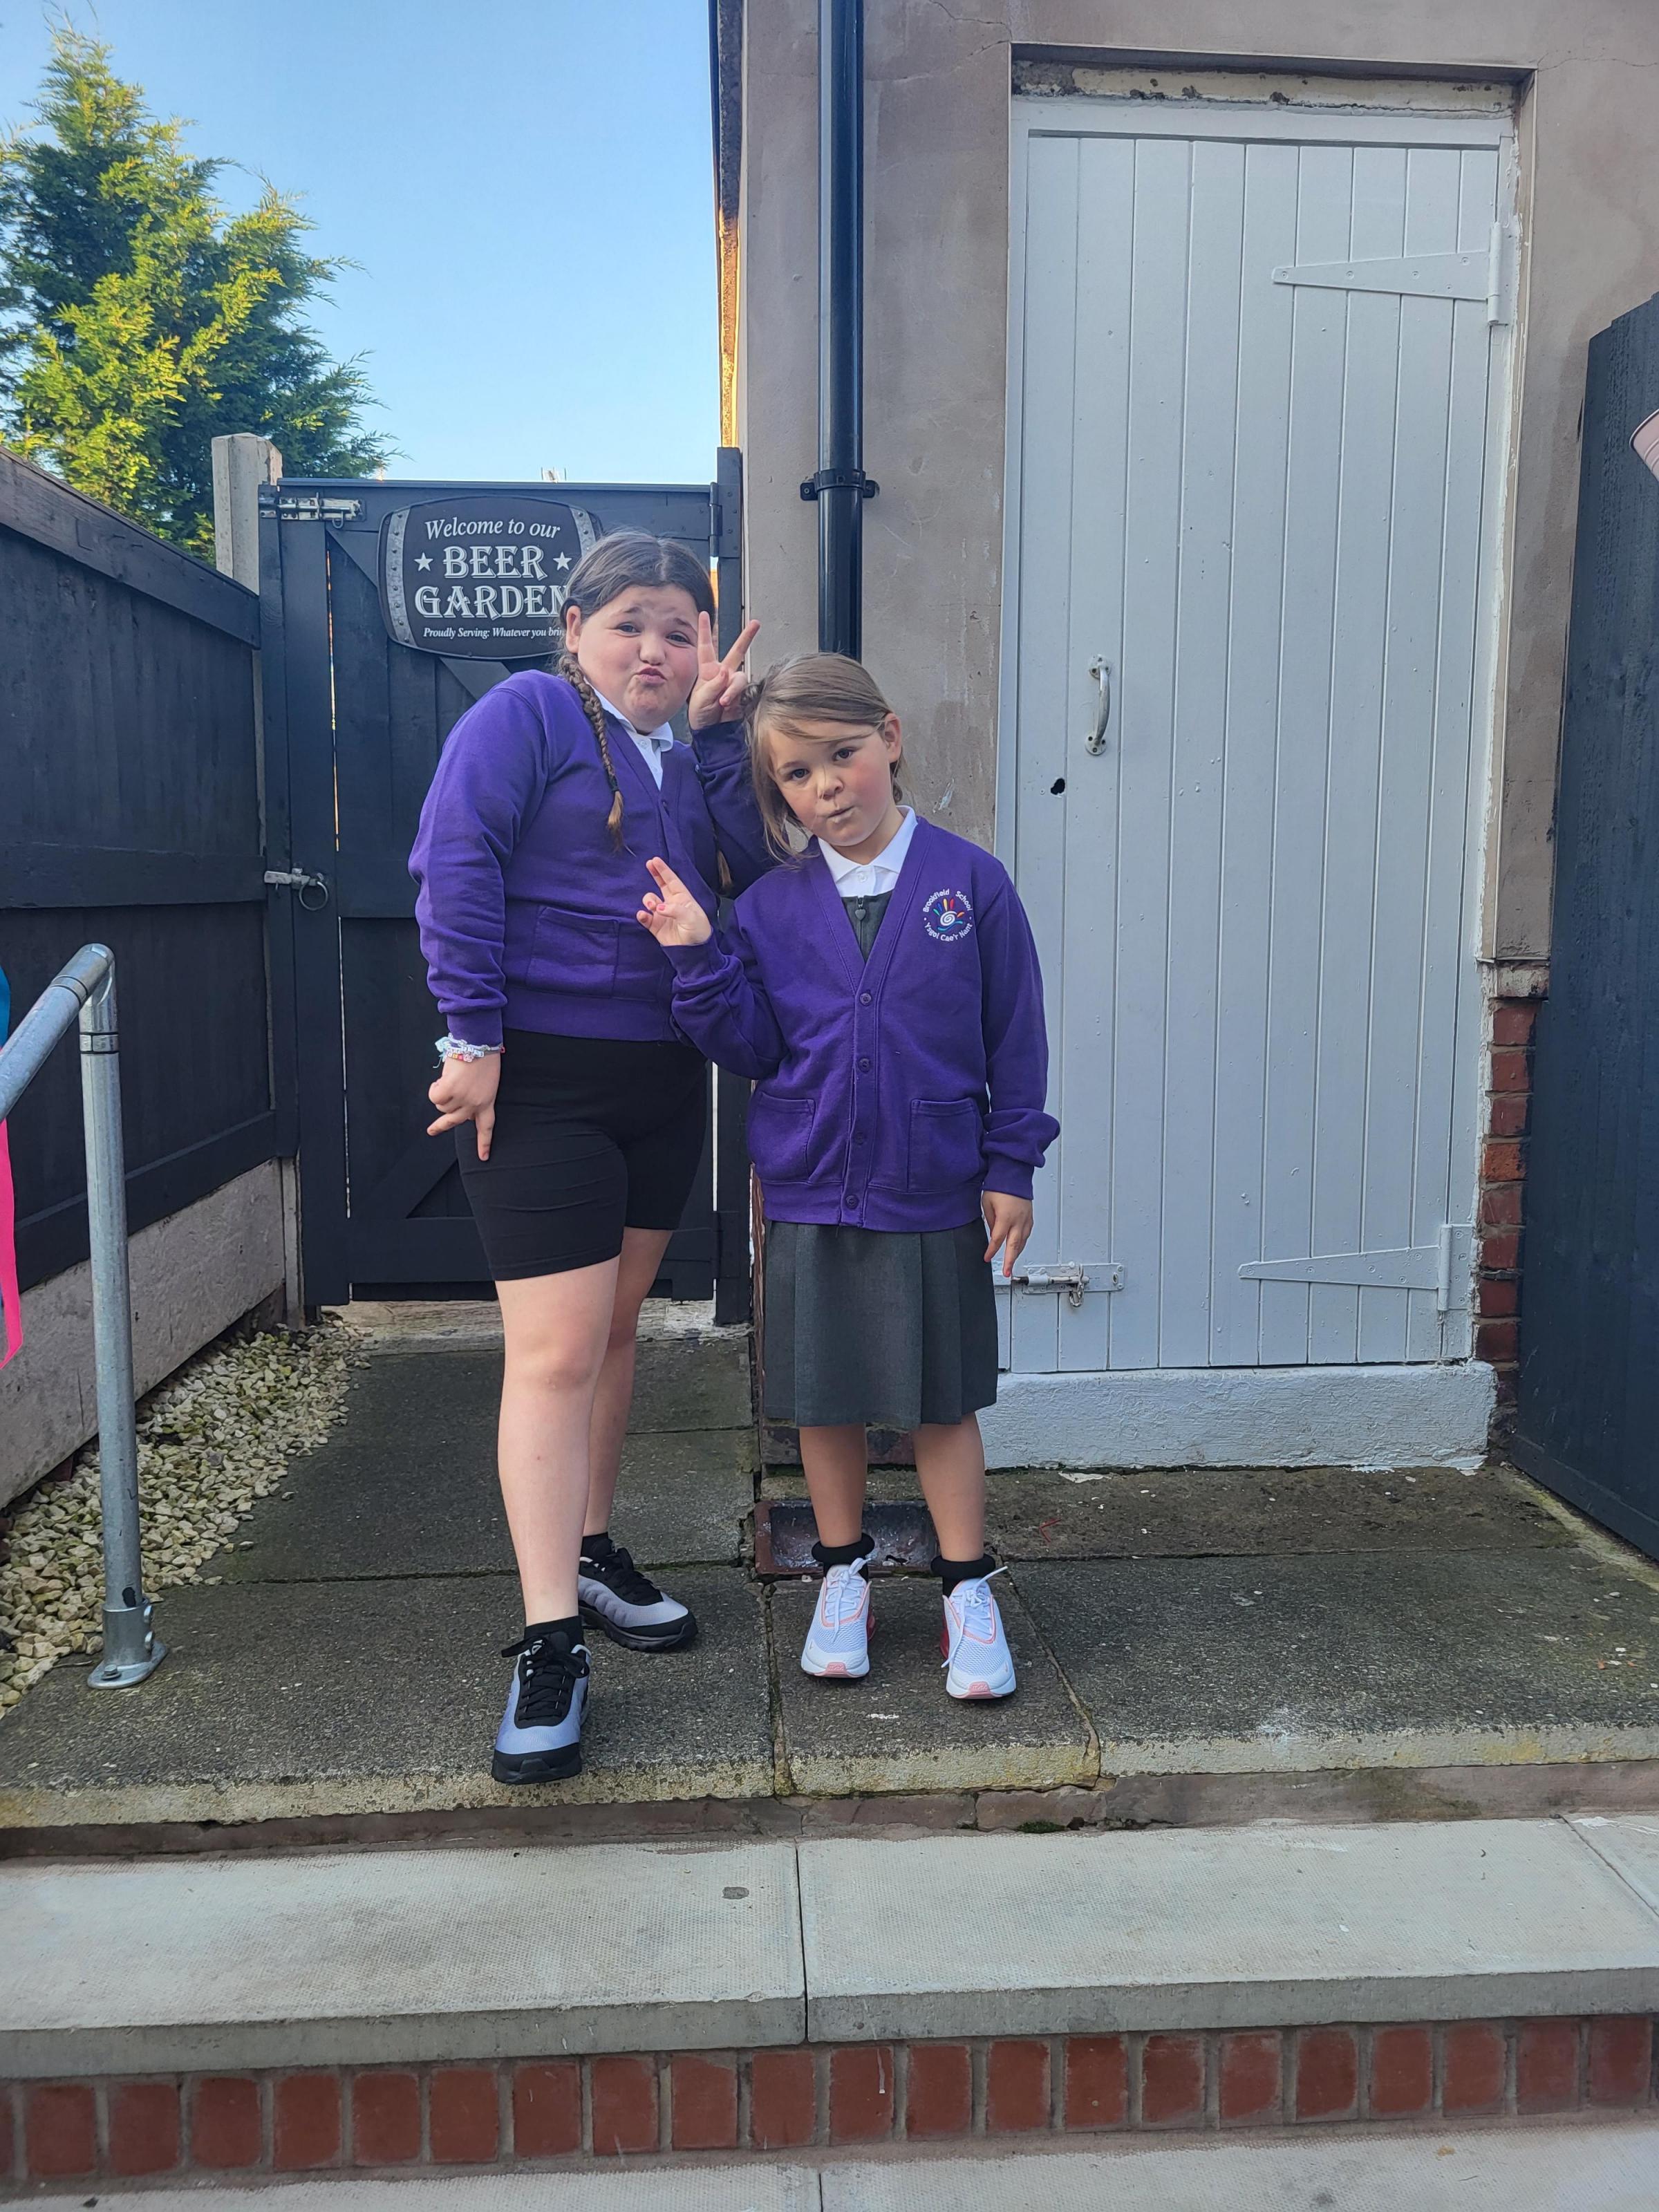 Carys Baker, from Flintshire: Rebecca and Alexa-Rose, Year 6 and 2 at Ysgol Caer Nant.